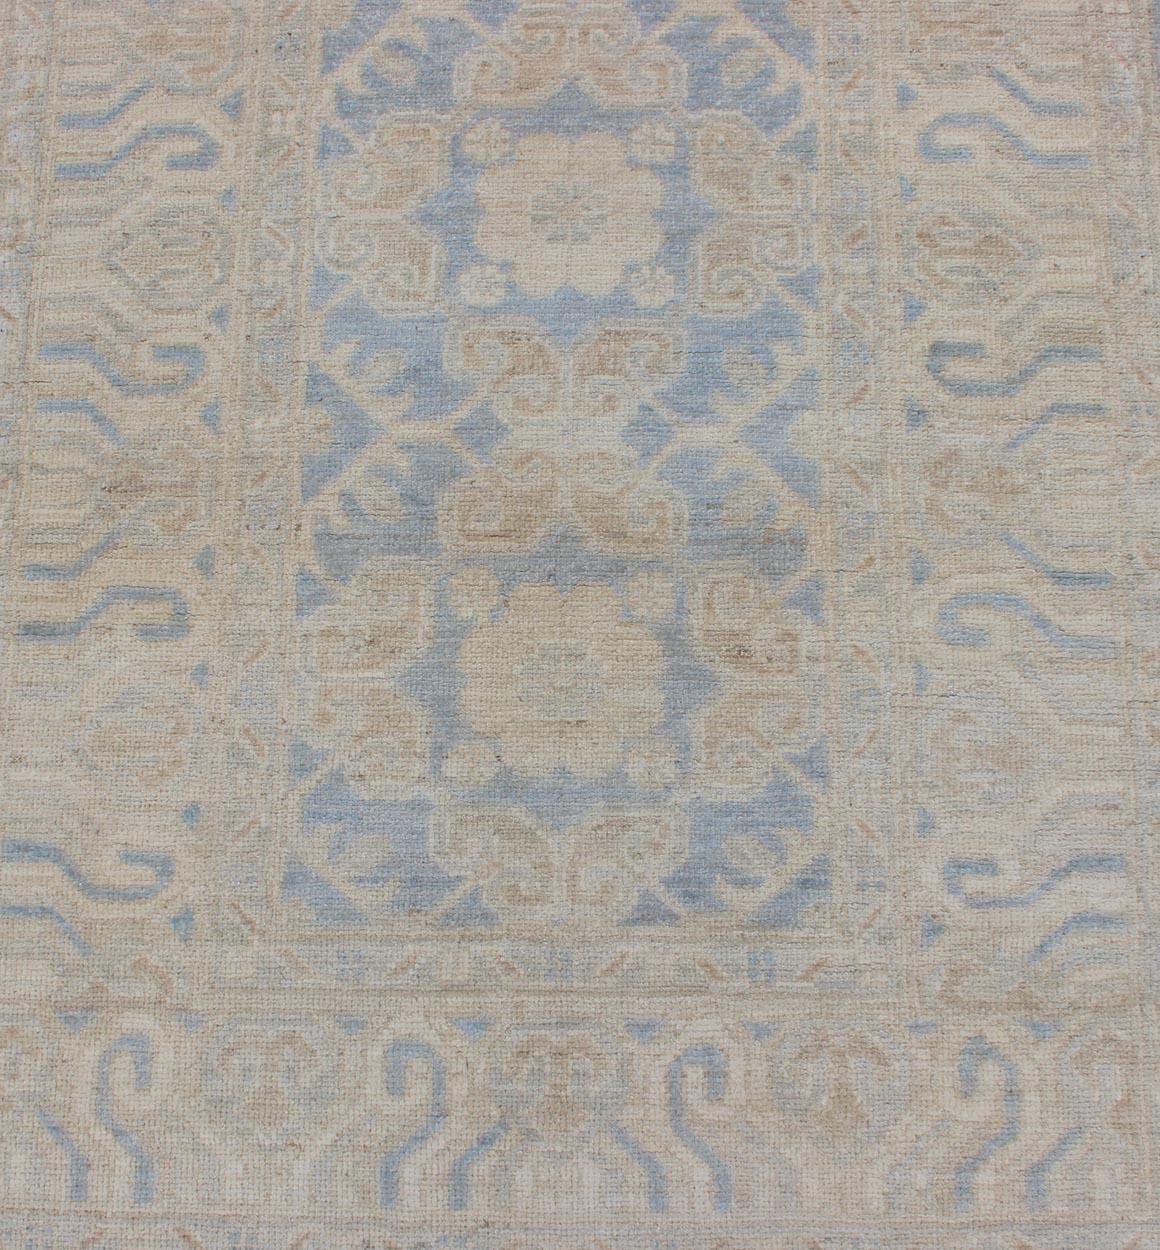 Afghan Khotan Runner with Geometric Design in Shades of Powder Blue and Tan For Sale 3